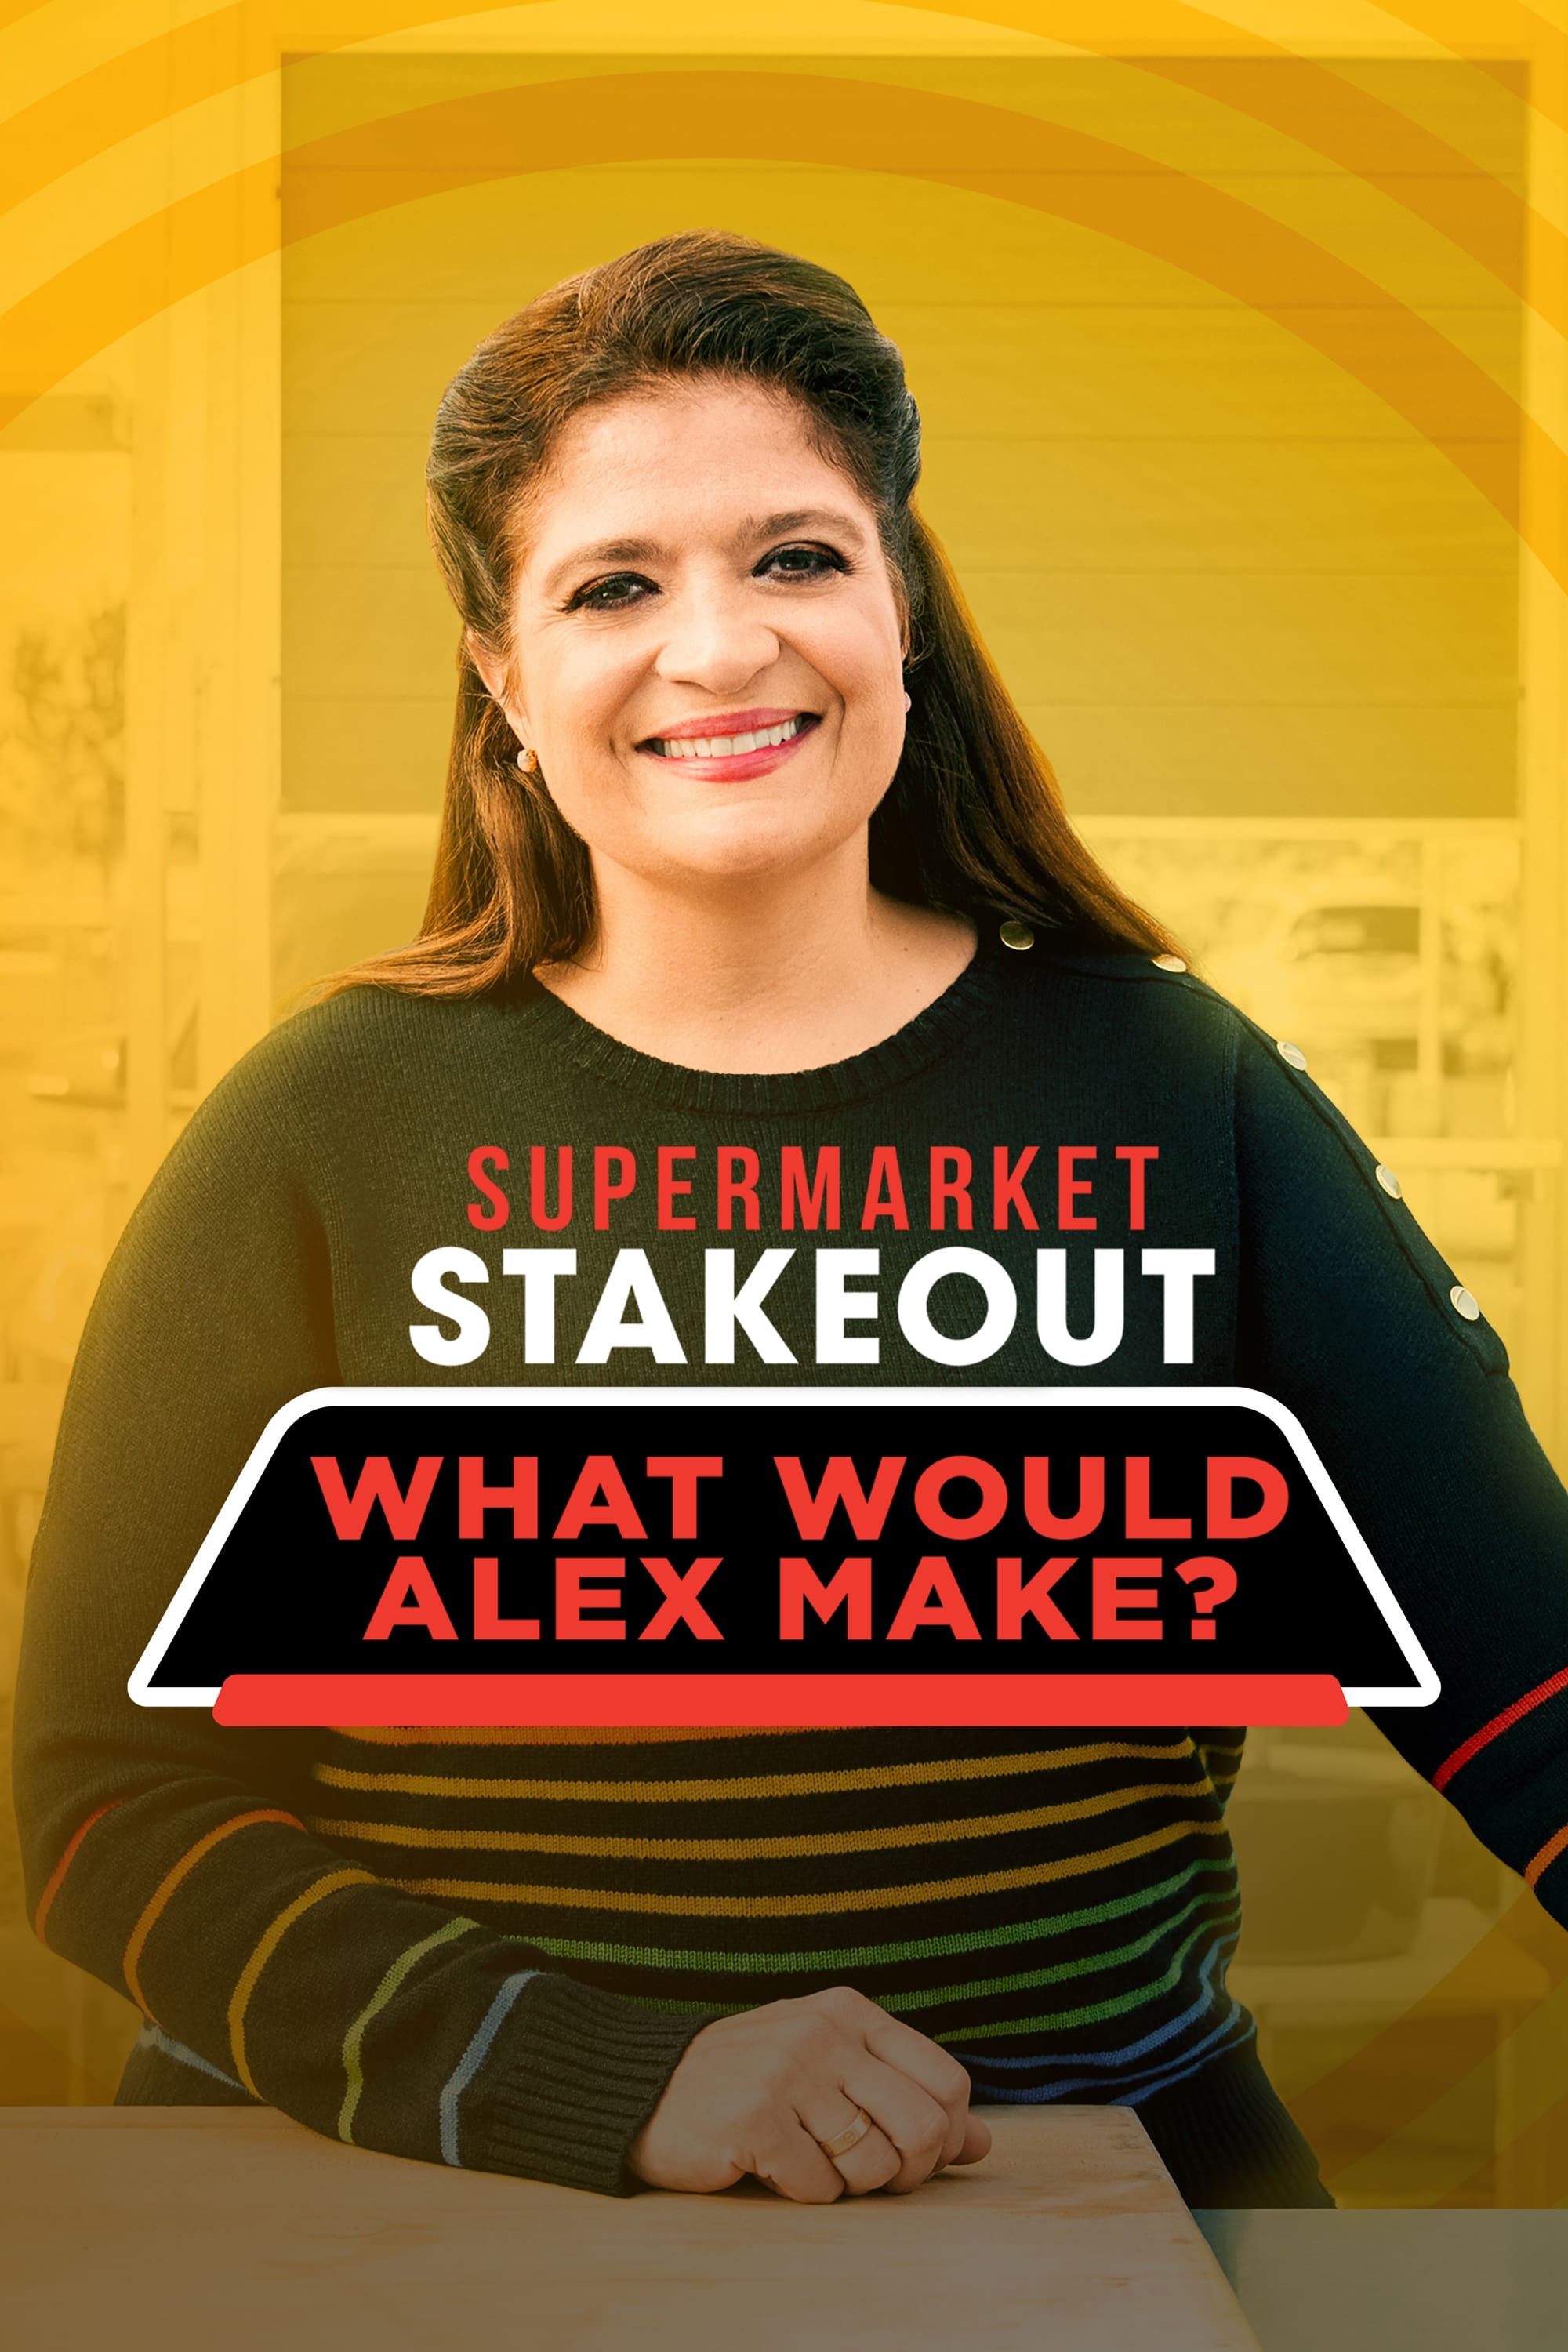 Supermarket Stakeout: What Would Alex Make?